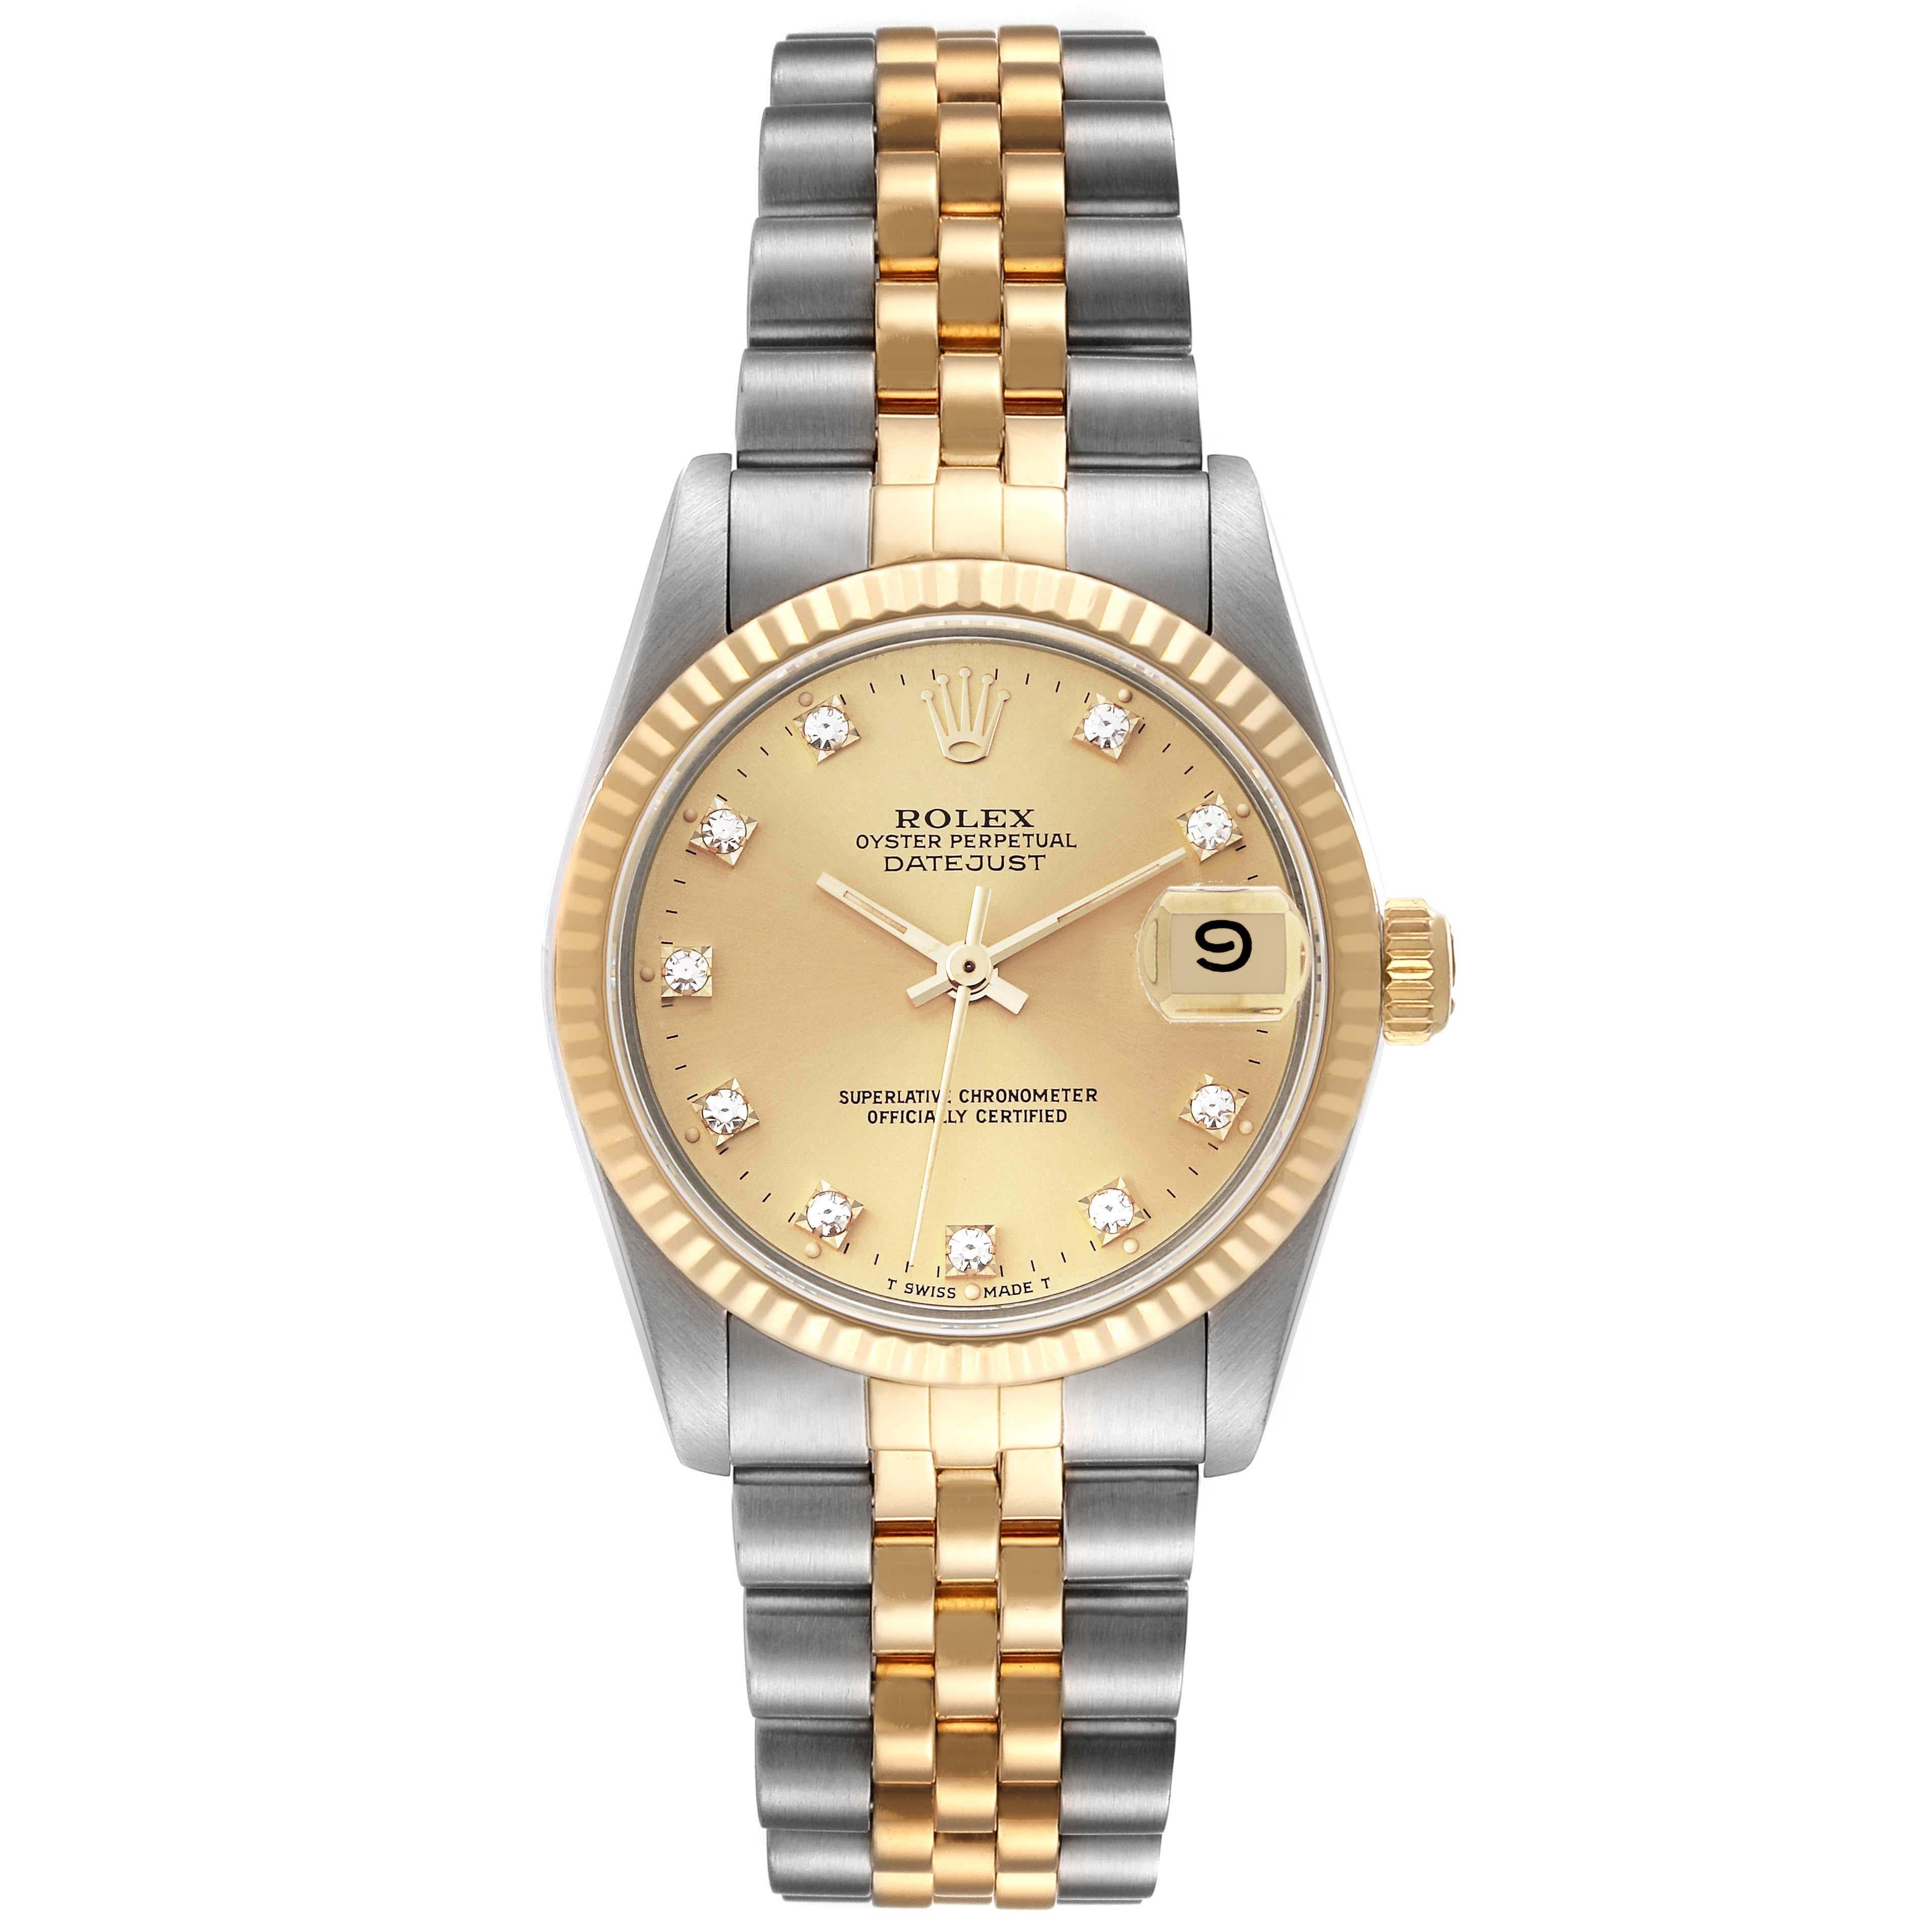 Rolex Datejust Midsize Steel Yellow Gold Diamond Dial Ladies Watch 68273. Officially certified chronometer automatic self-winding movement. Stainless steel oyster case 31 mm in diameter. Rolex logo on an 18K yellow gold crown. 18k yellow gold fluted